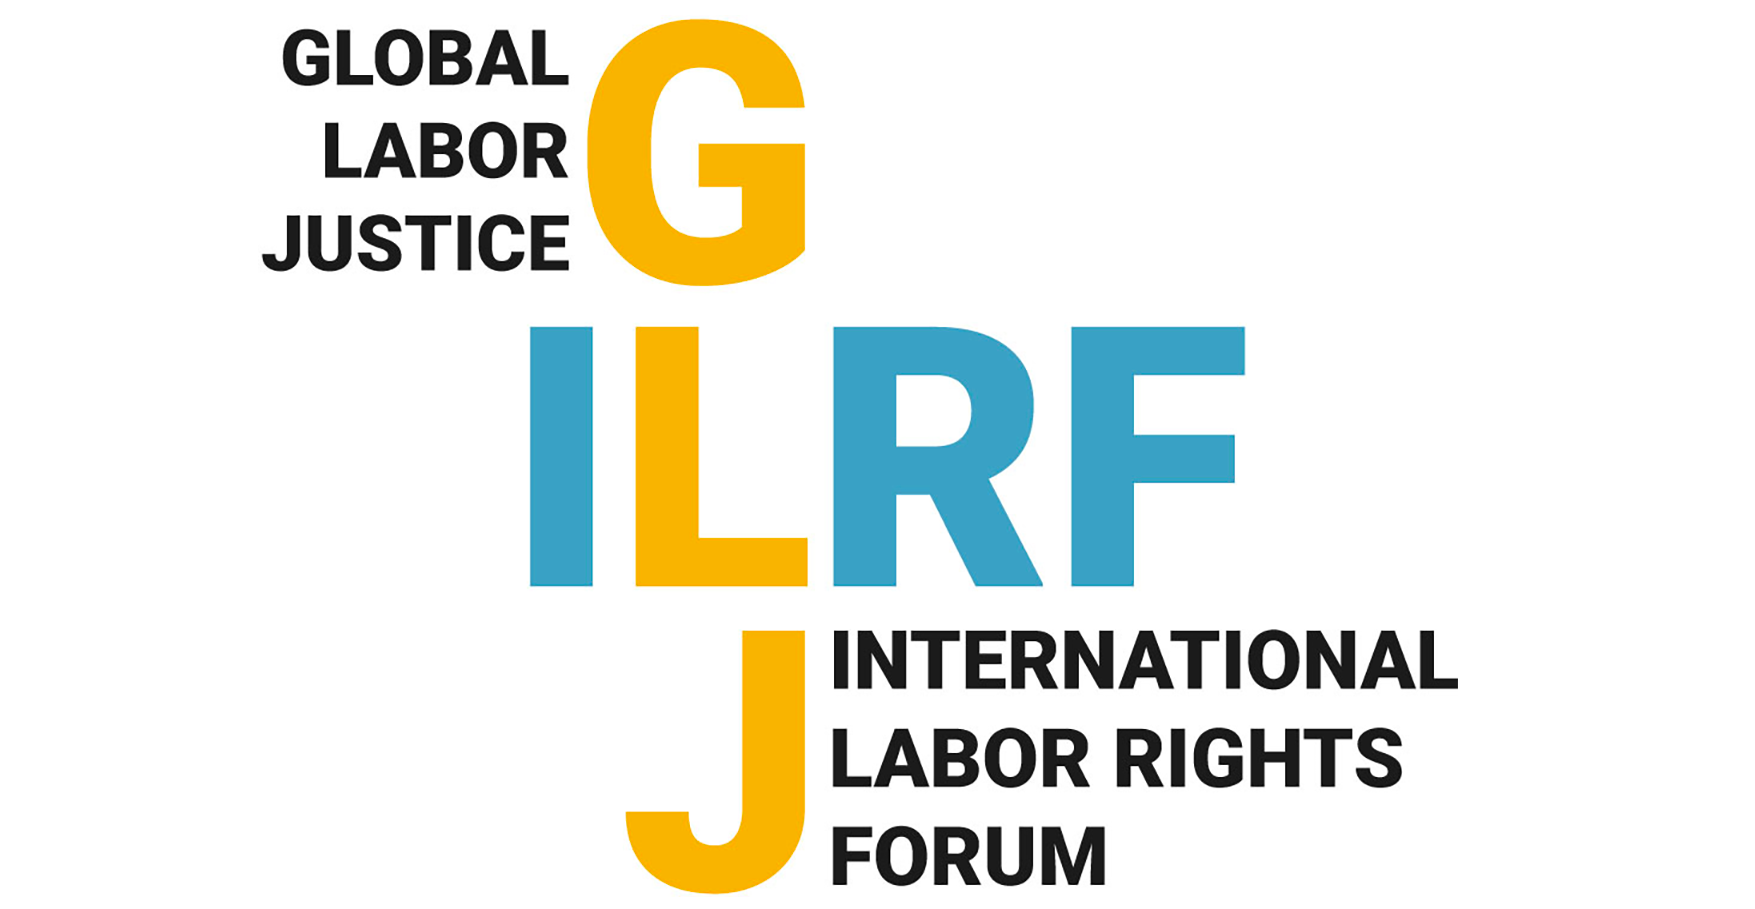 International Labor Rights Forum-Global Labor Justice